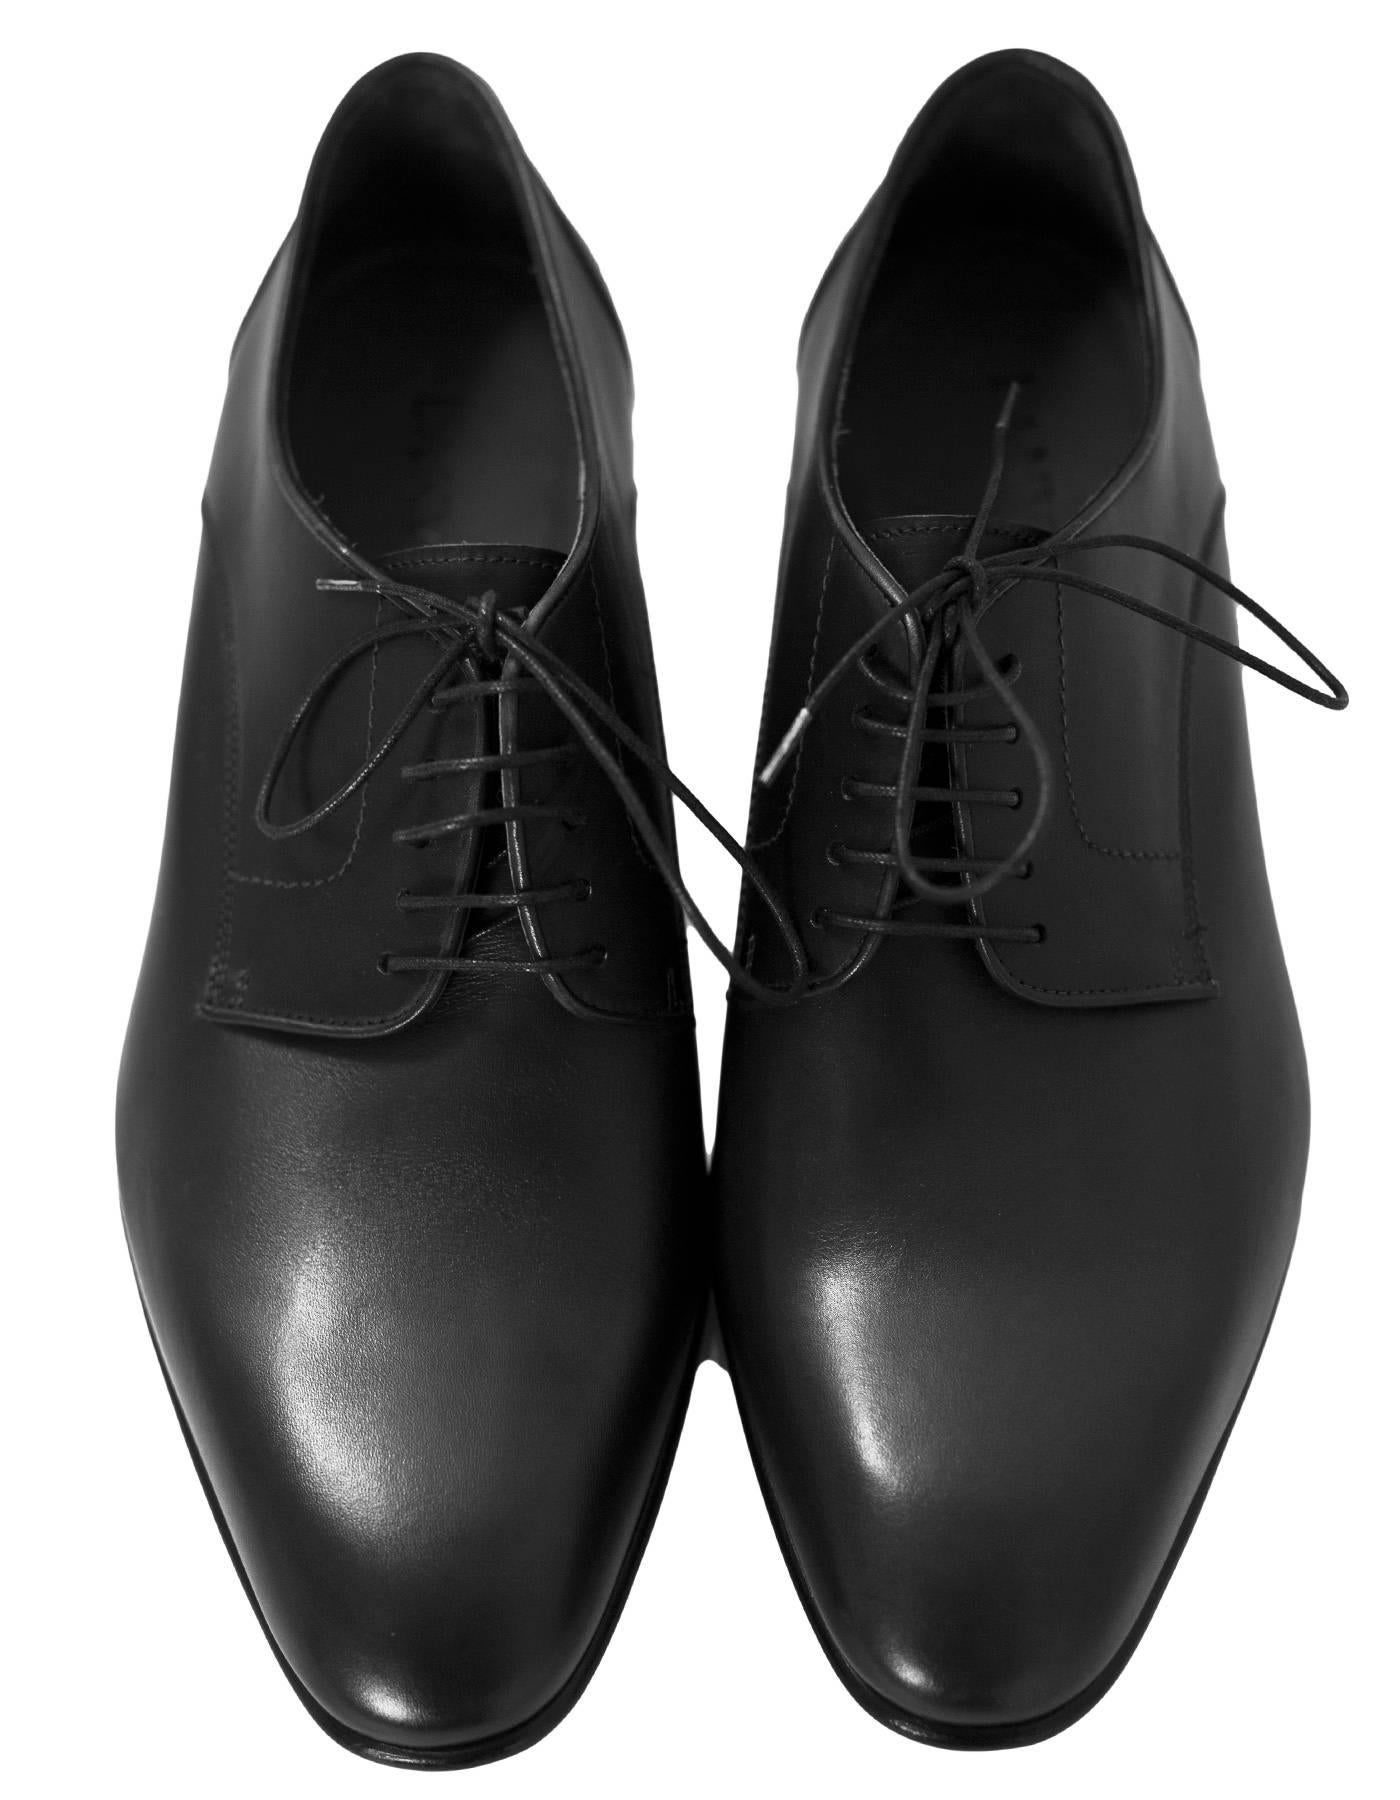 Lanvin Men's Black Leather Oxford Shoes Sz 8 NIB In Excellent Condition In New York, NY